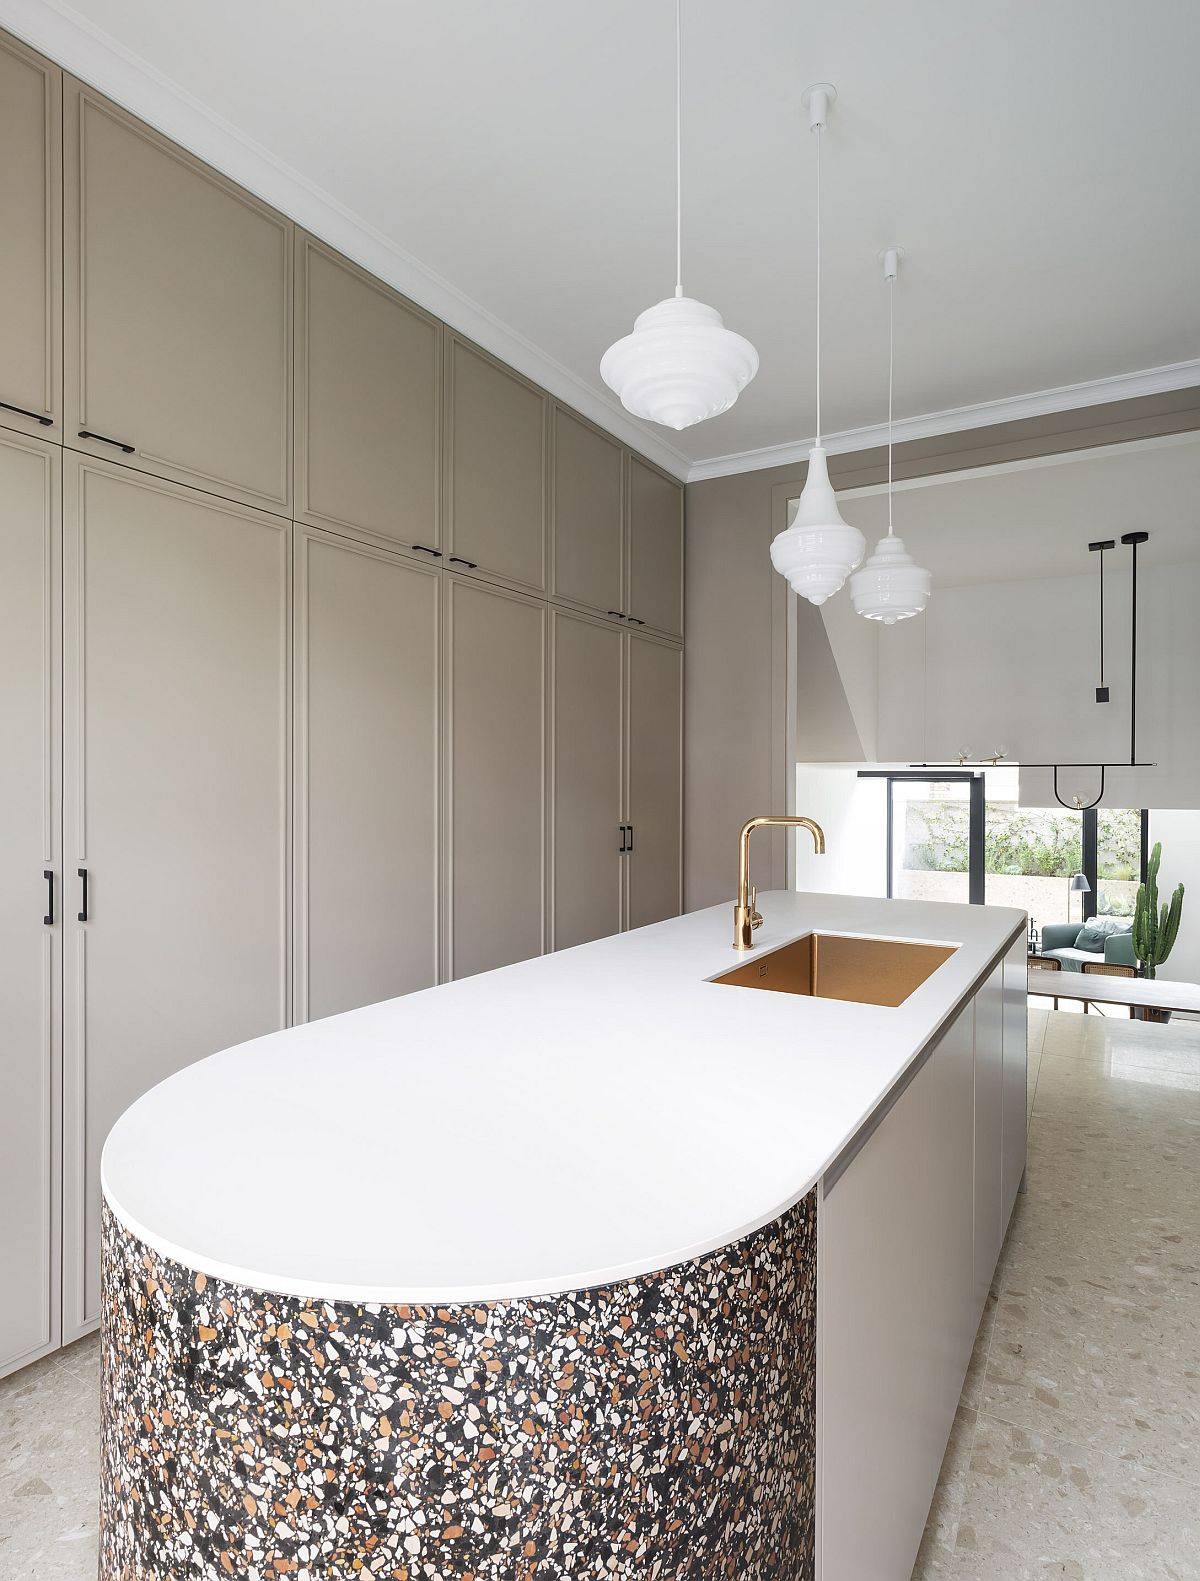 Kitchen-island-with-a-rounded-edge-and-terrazo-tile-finish-makes-a-big-visual-impact-36739